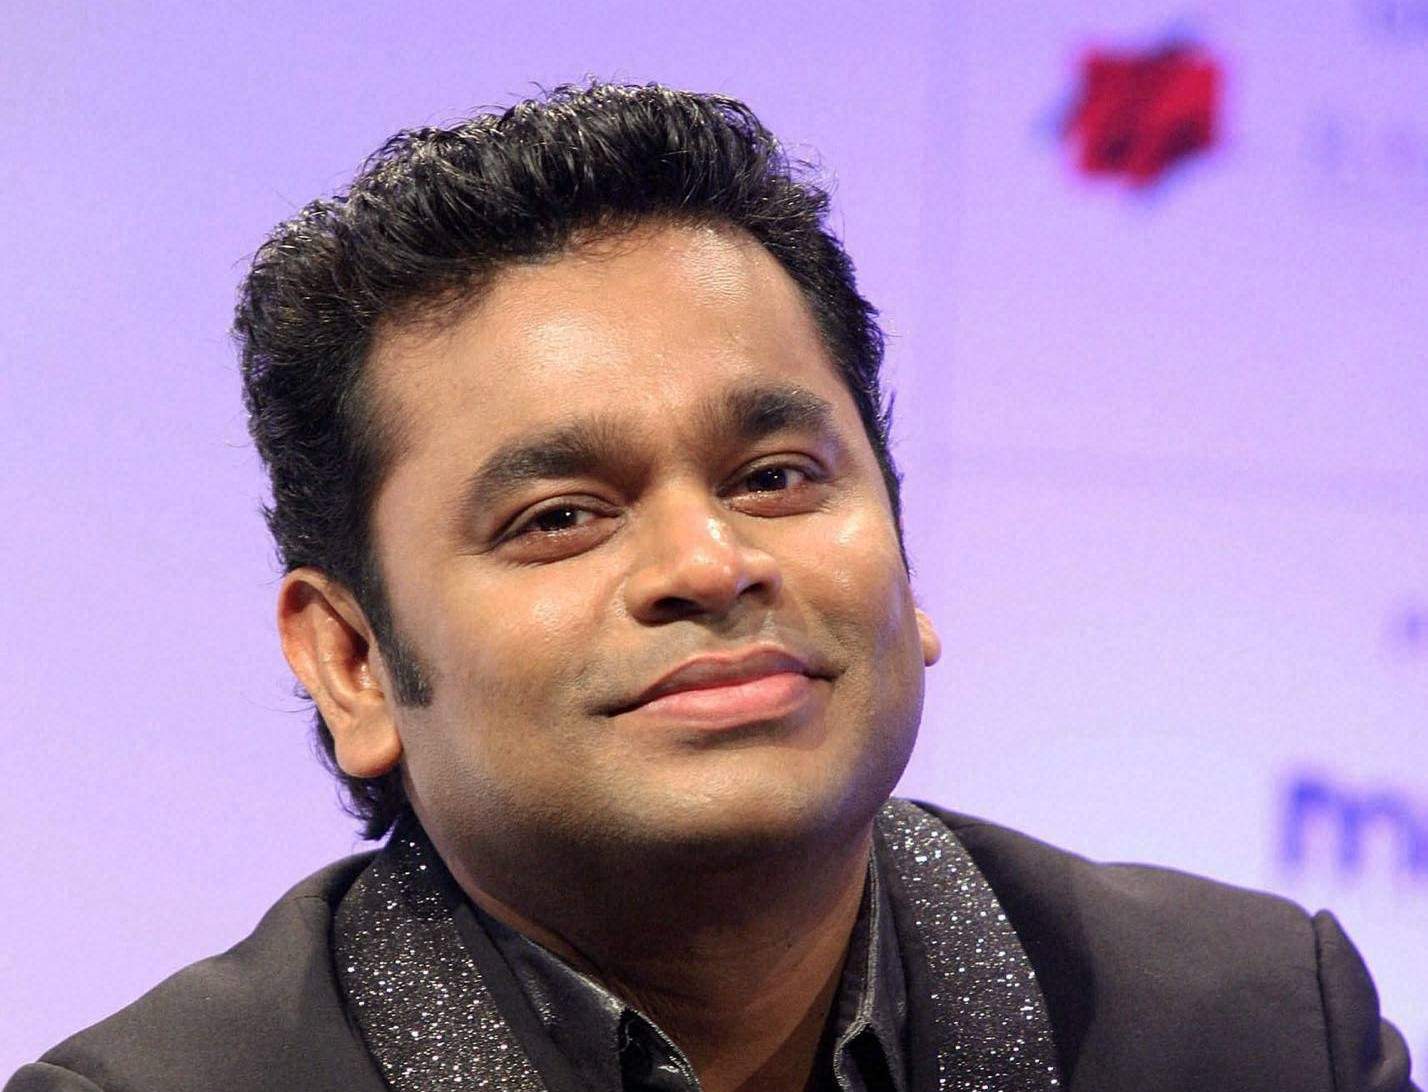 AR Rahman, set for 30 years of music, says world must see India’s rainbow of cultures